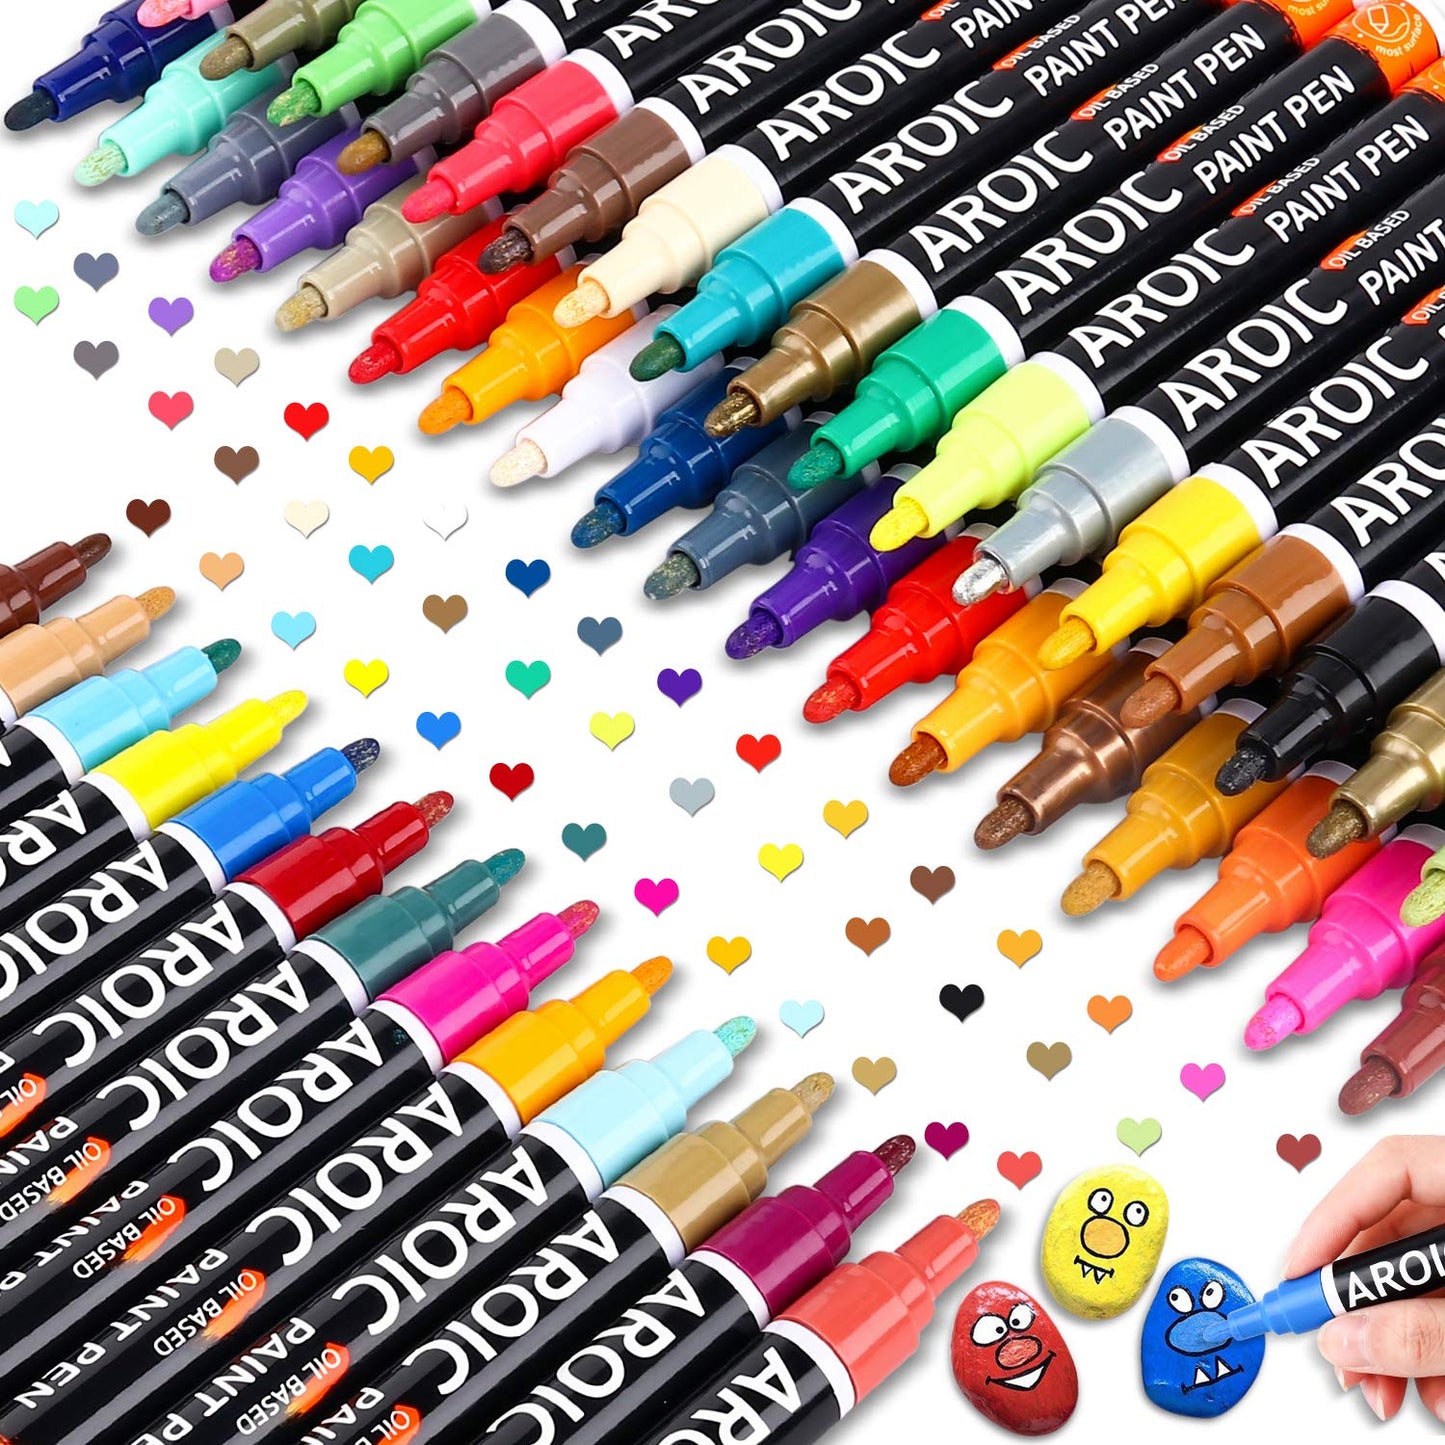 AROIC Paint Pens for Rock Painting - 48 Pack.Write On Anything! Paint pens for Rock, Wood, Metal, Plastic, Glass, Canvas, Ceramic & More! Low-Odor,